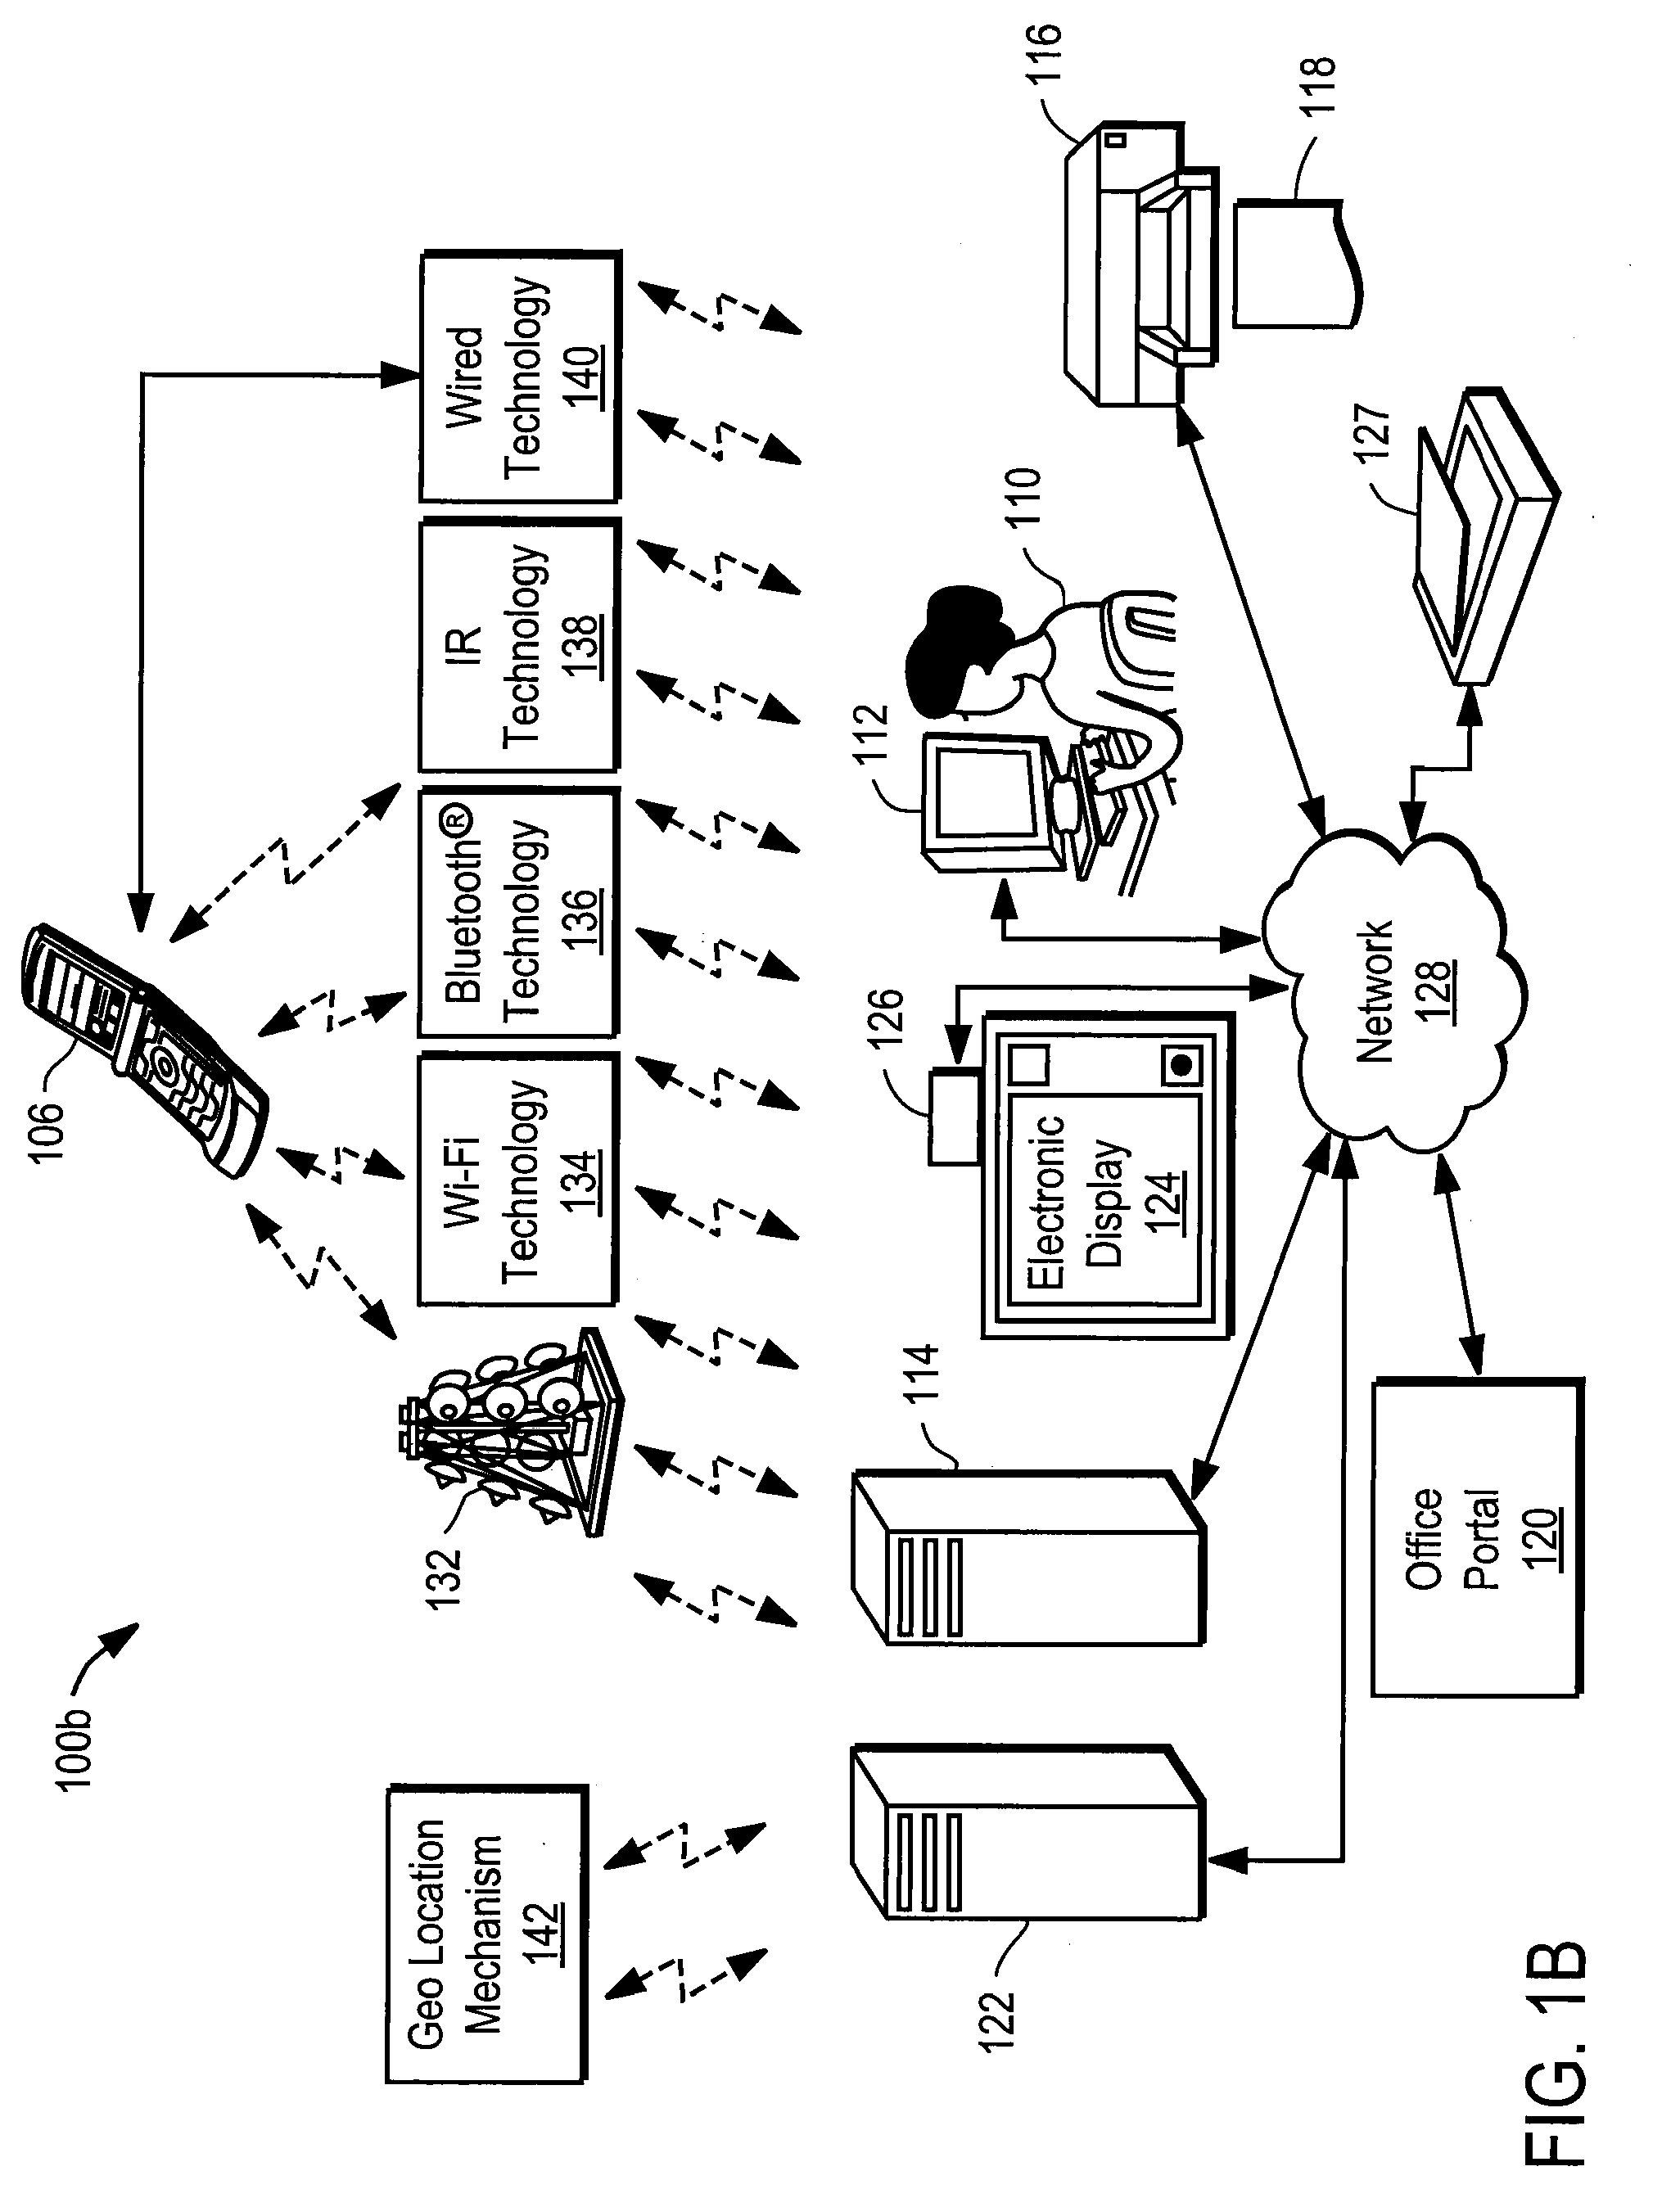 System and methods for portable device for mixed media system